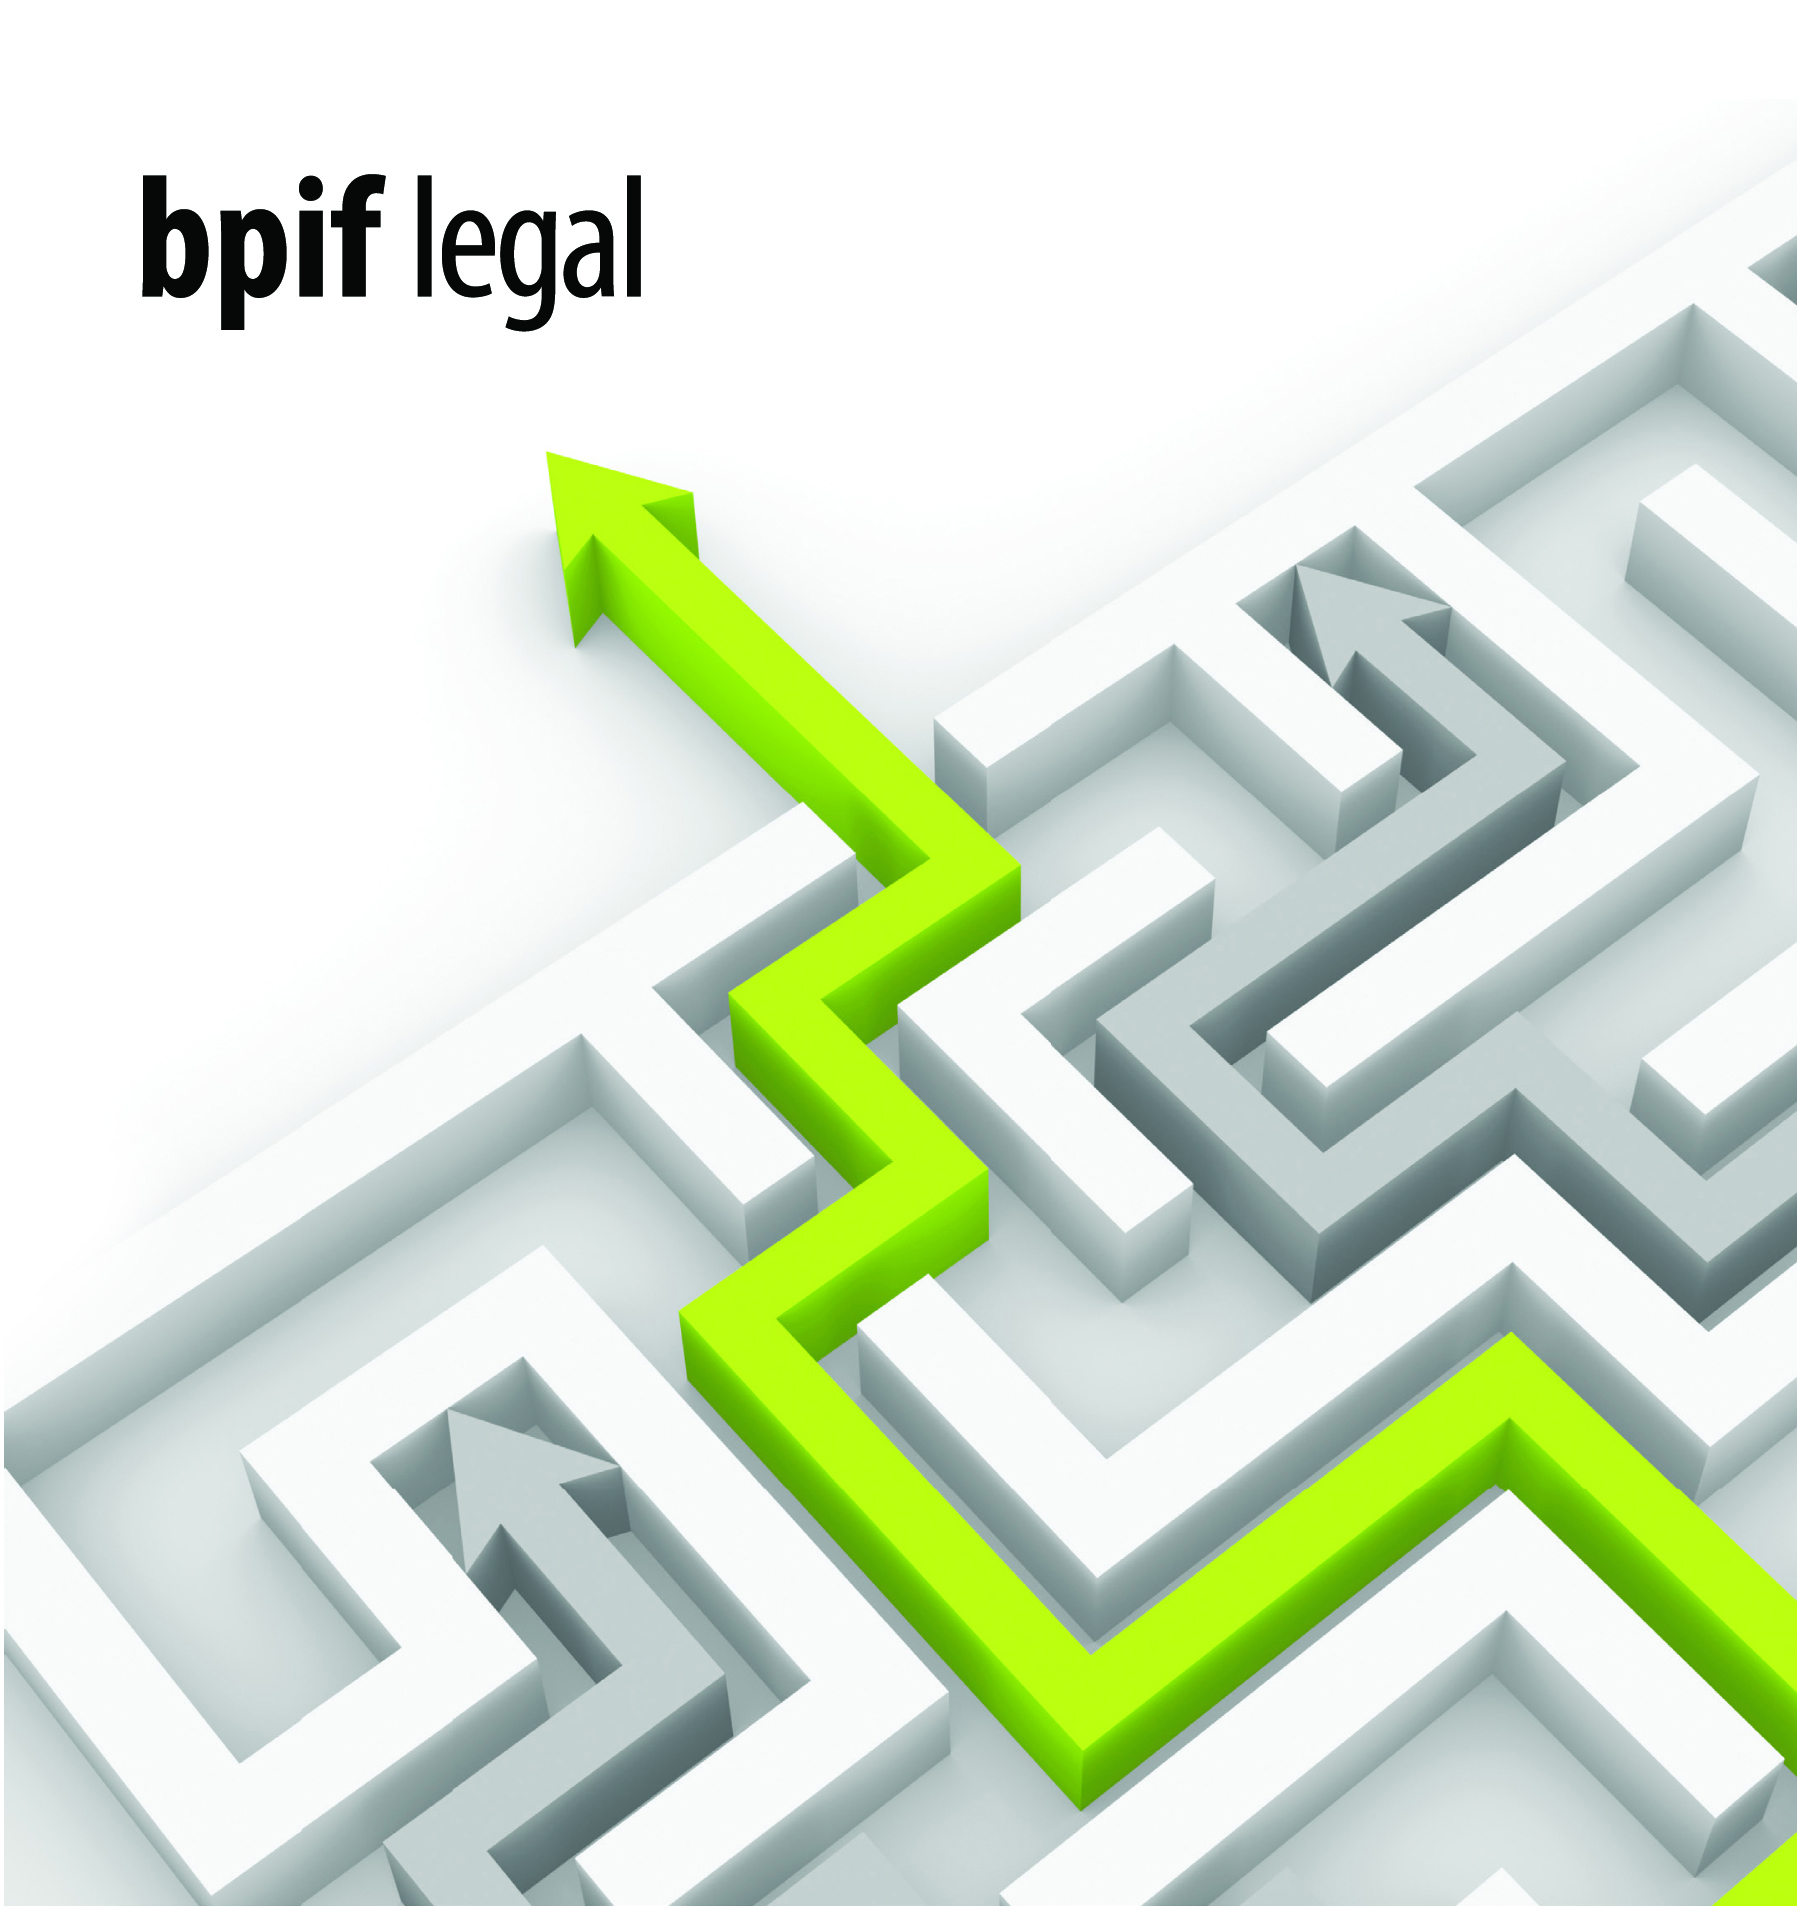 Find out how BPIF Legal can work for you